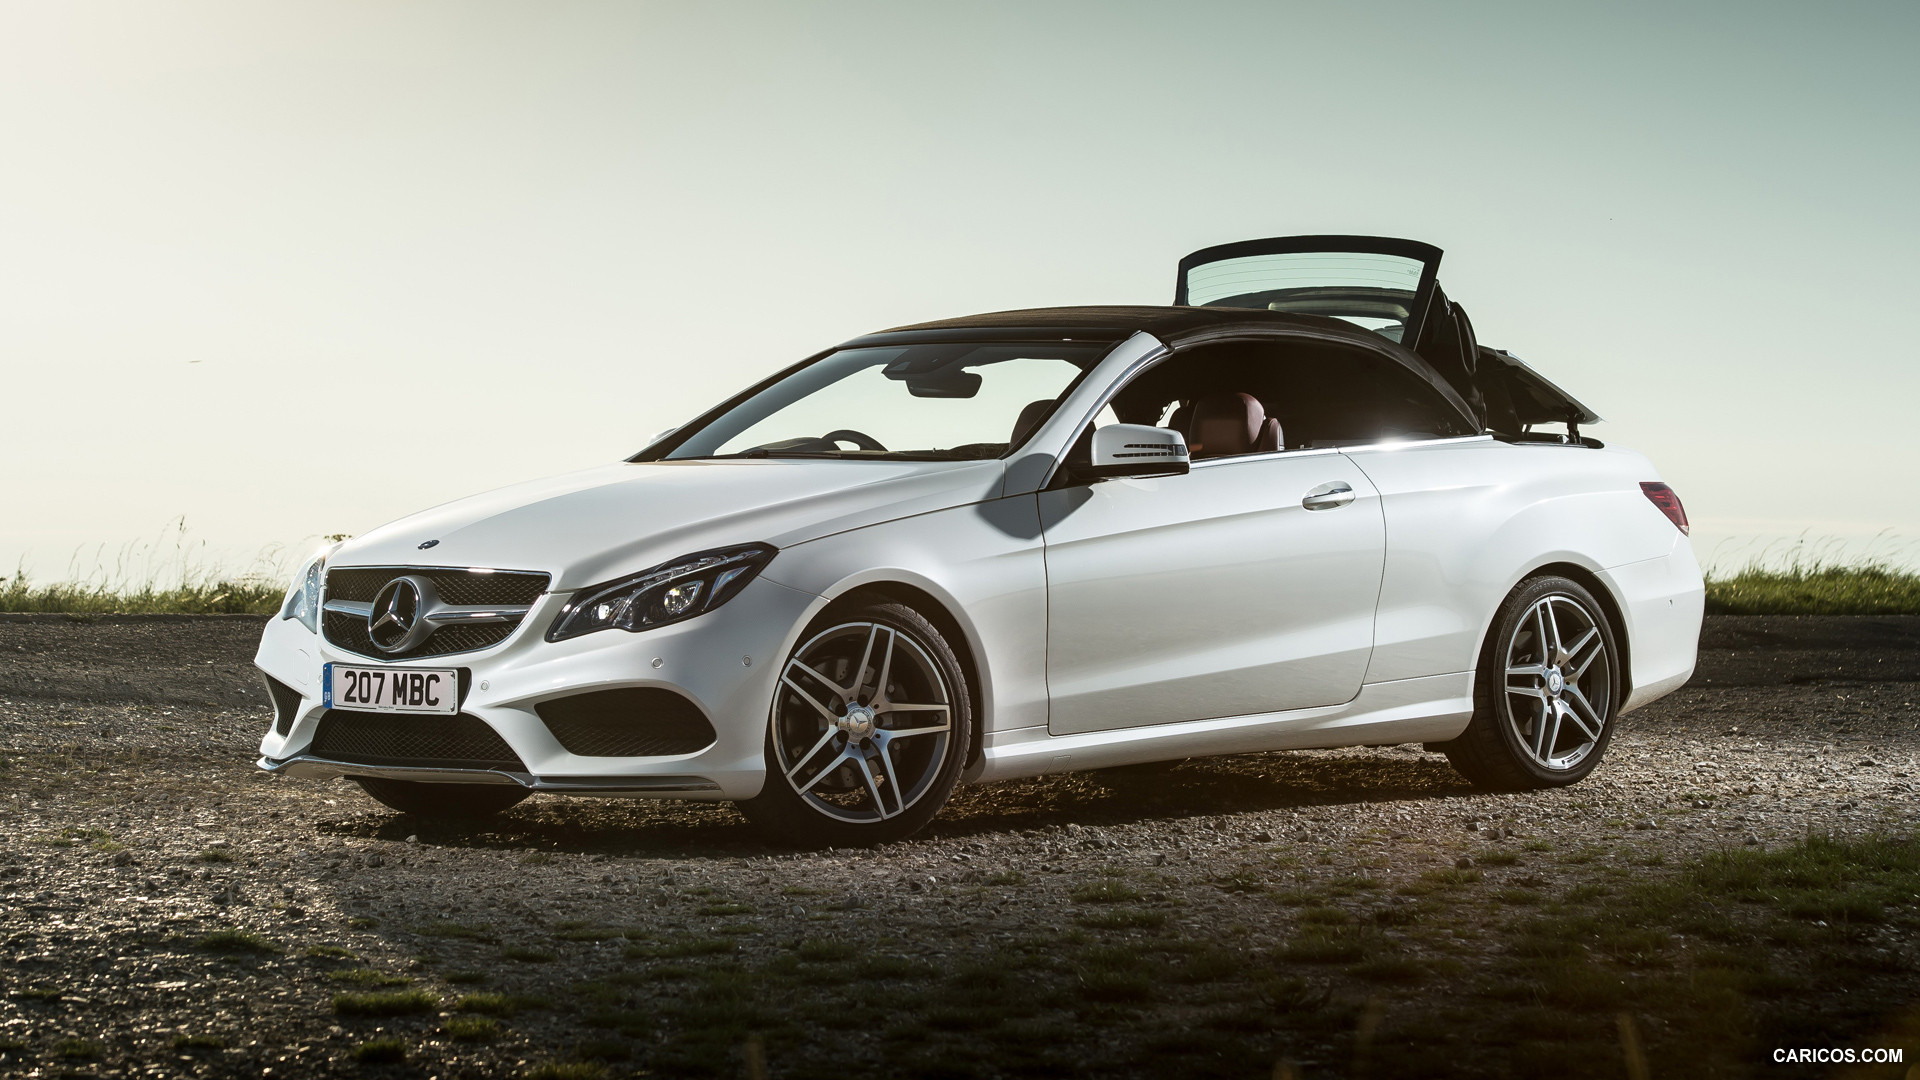 2014 Mercedes-Benz E-Class Cabriolet (UK-Version) - Top In Action - Side, #12 of 15